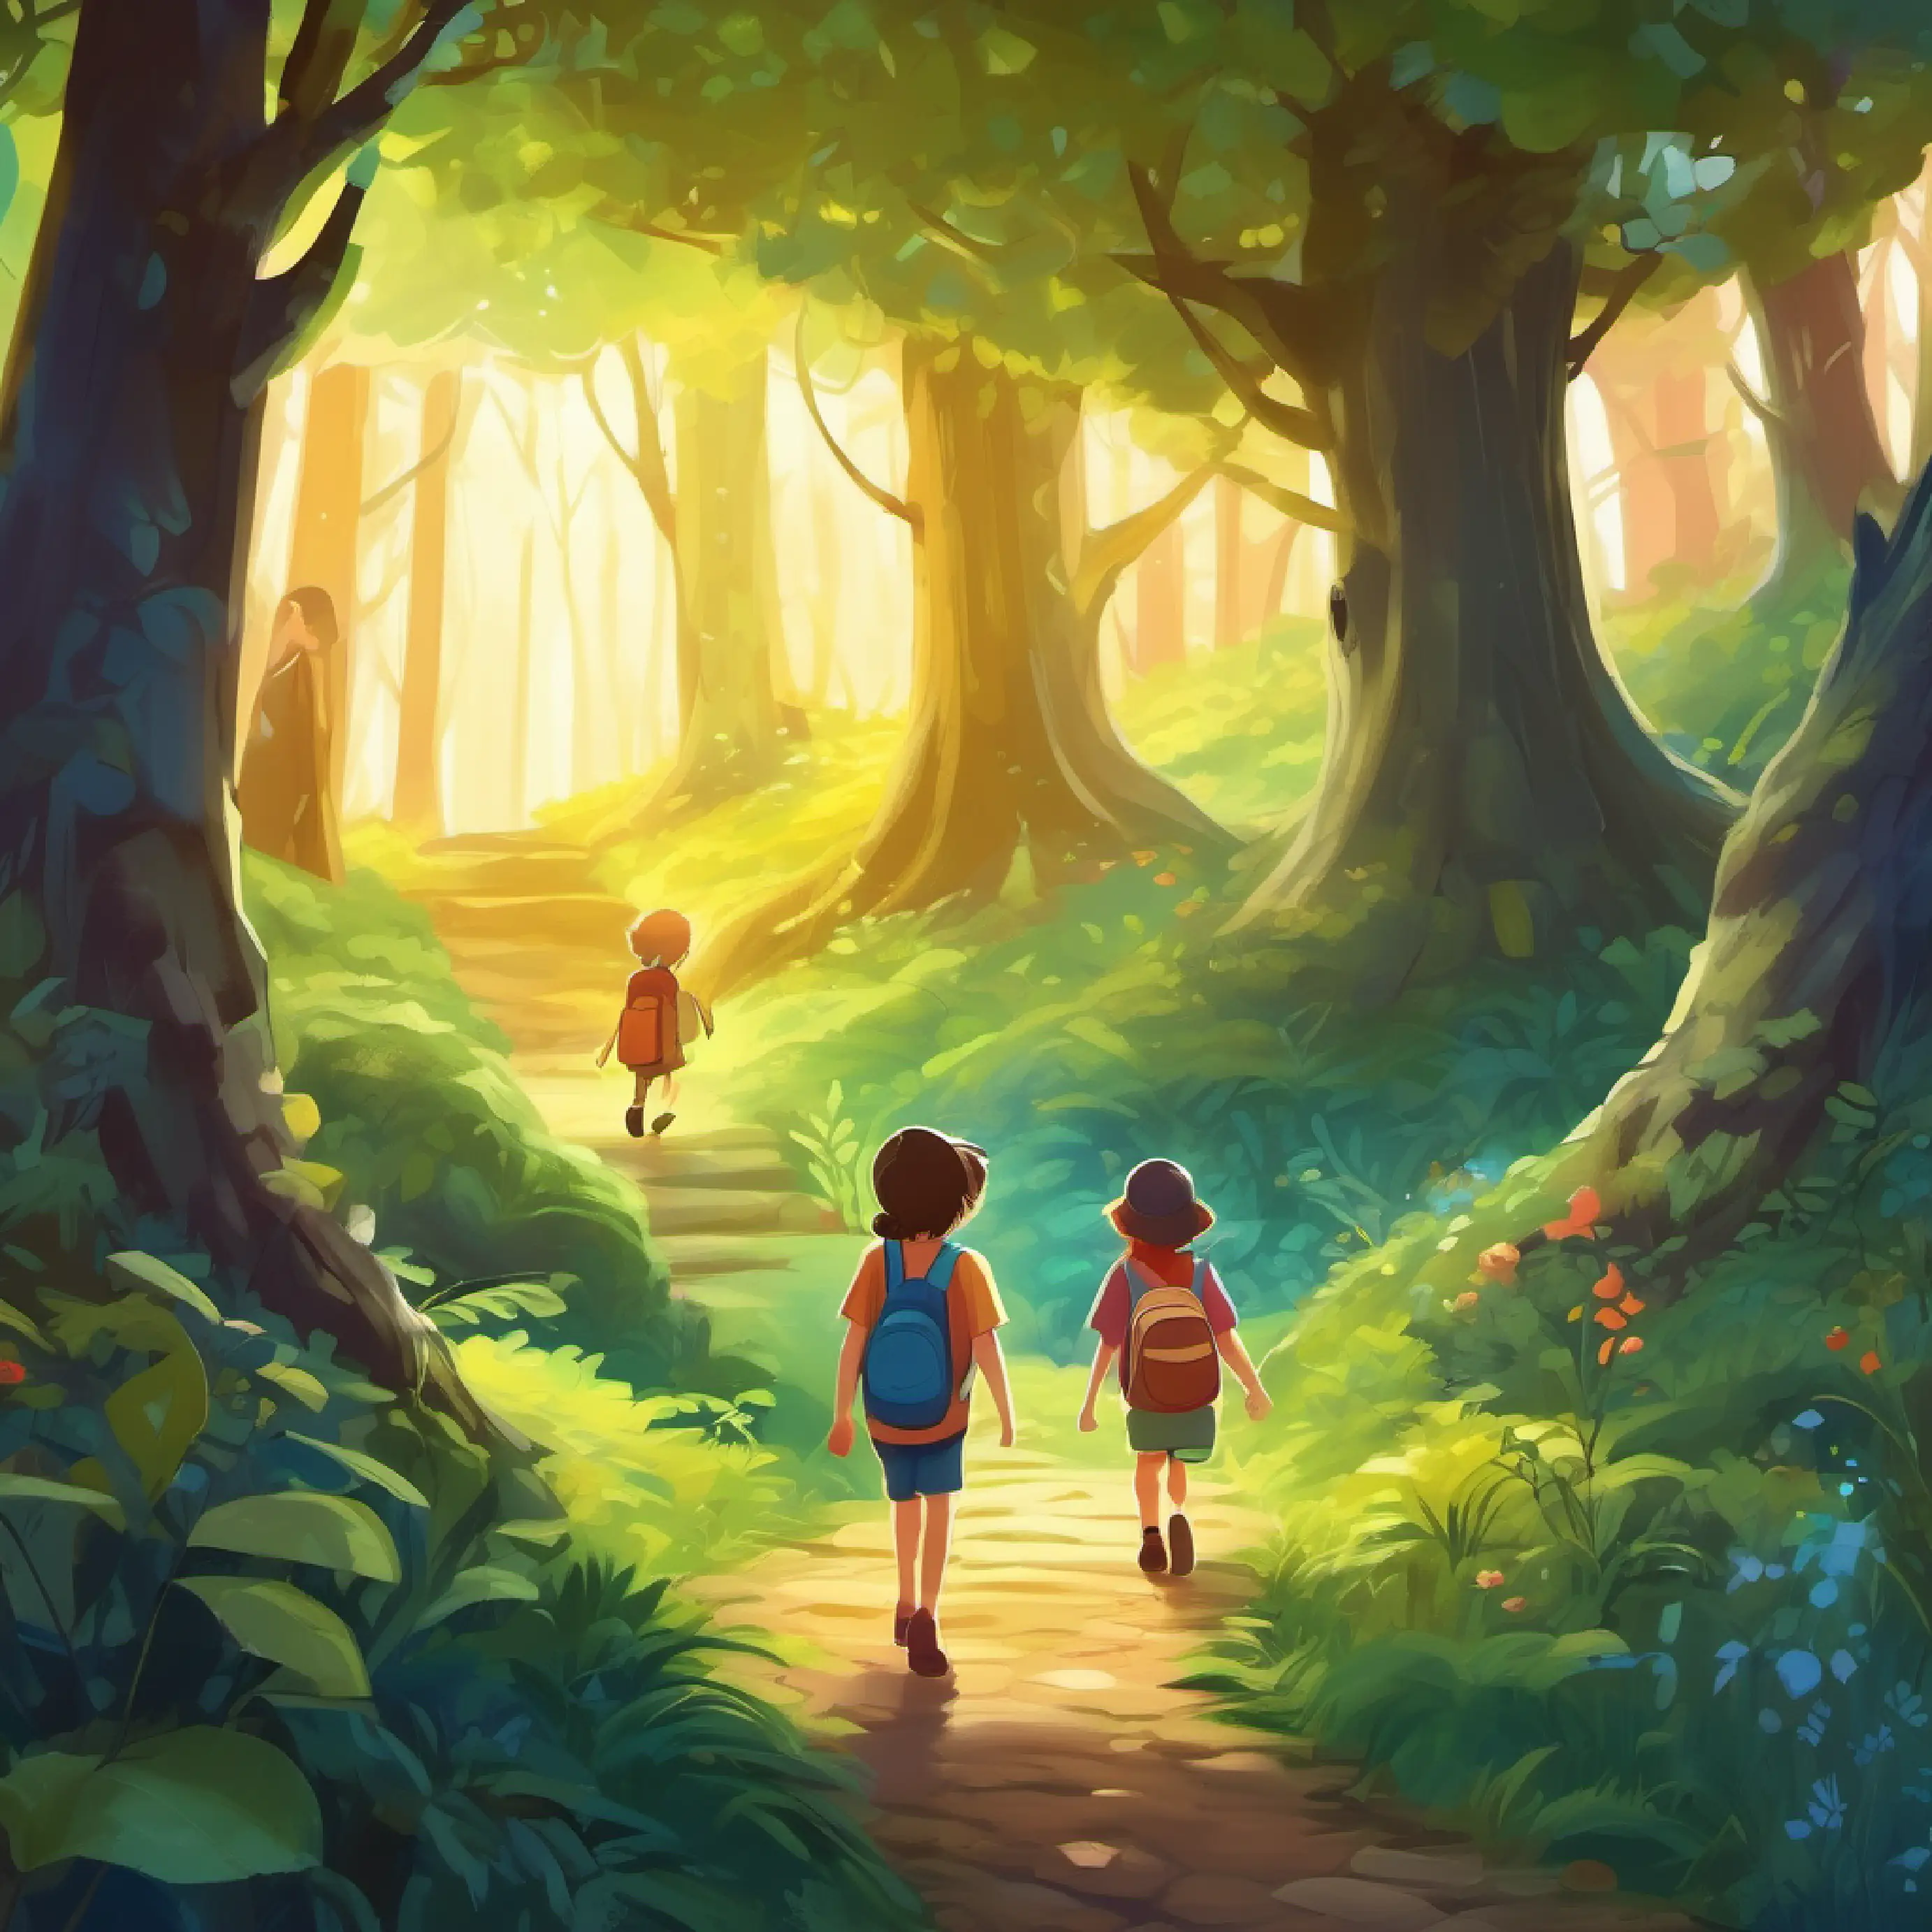 Children stepping into a magical forest from the map.